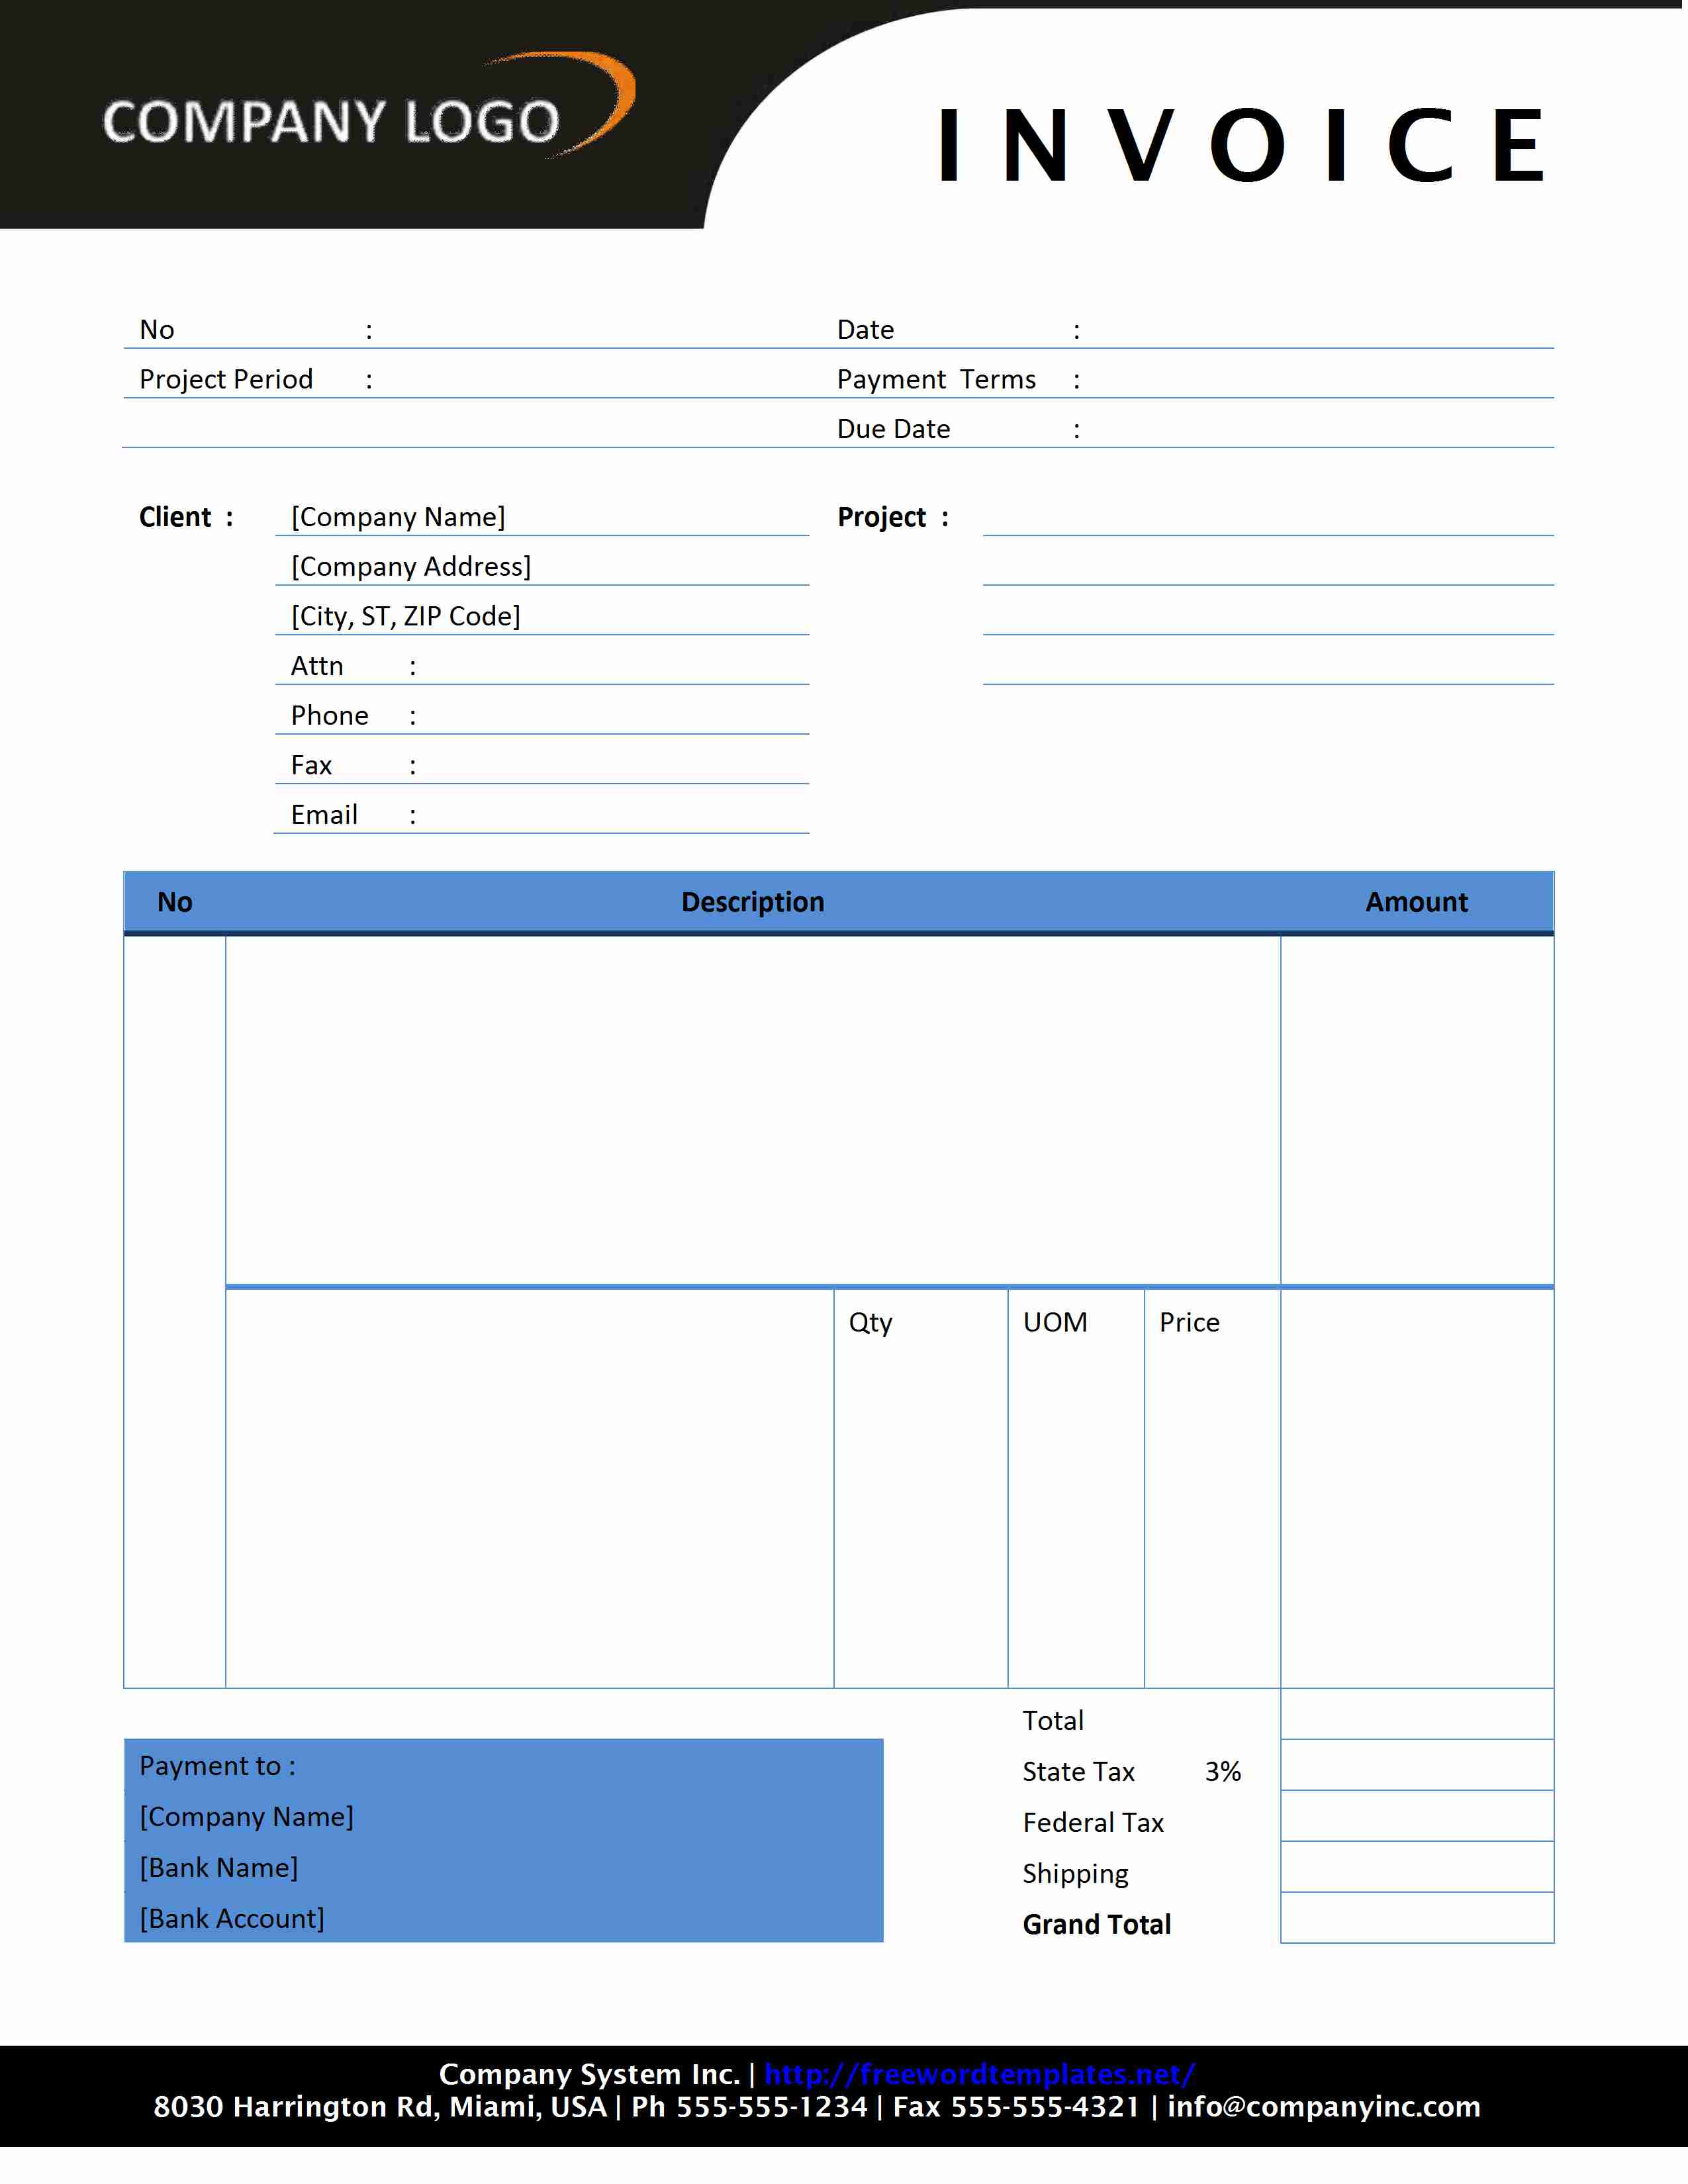 Free Resume Samples & Writing Guides for All: 23/23/23 Intended For Invoice Template Word 2010